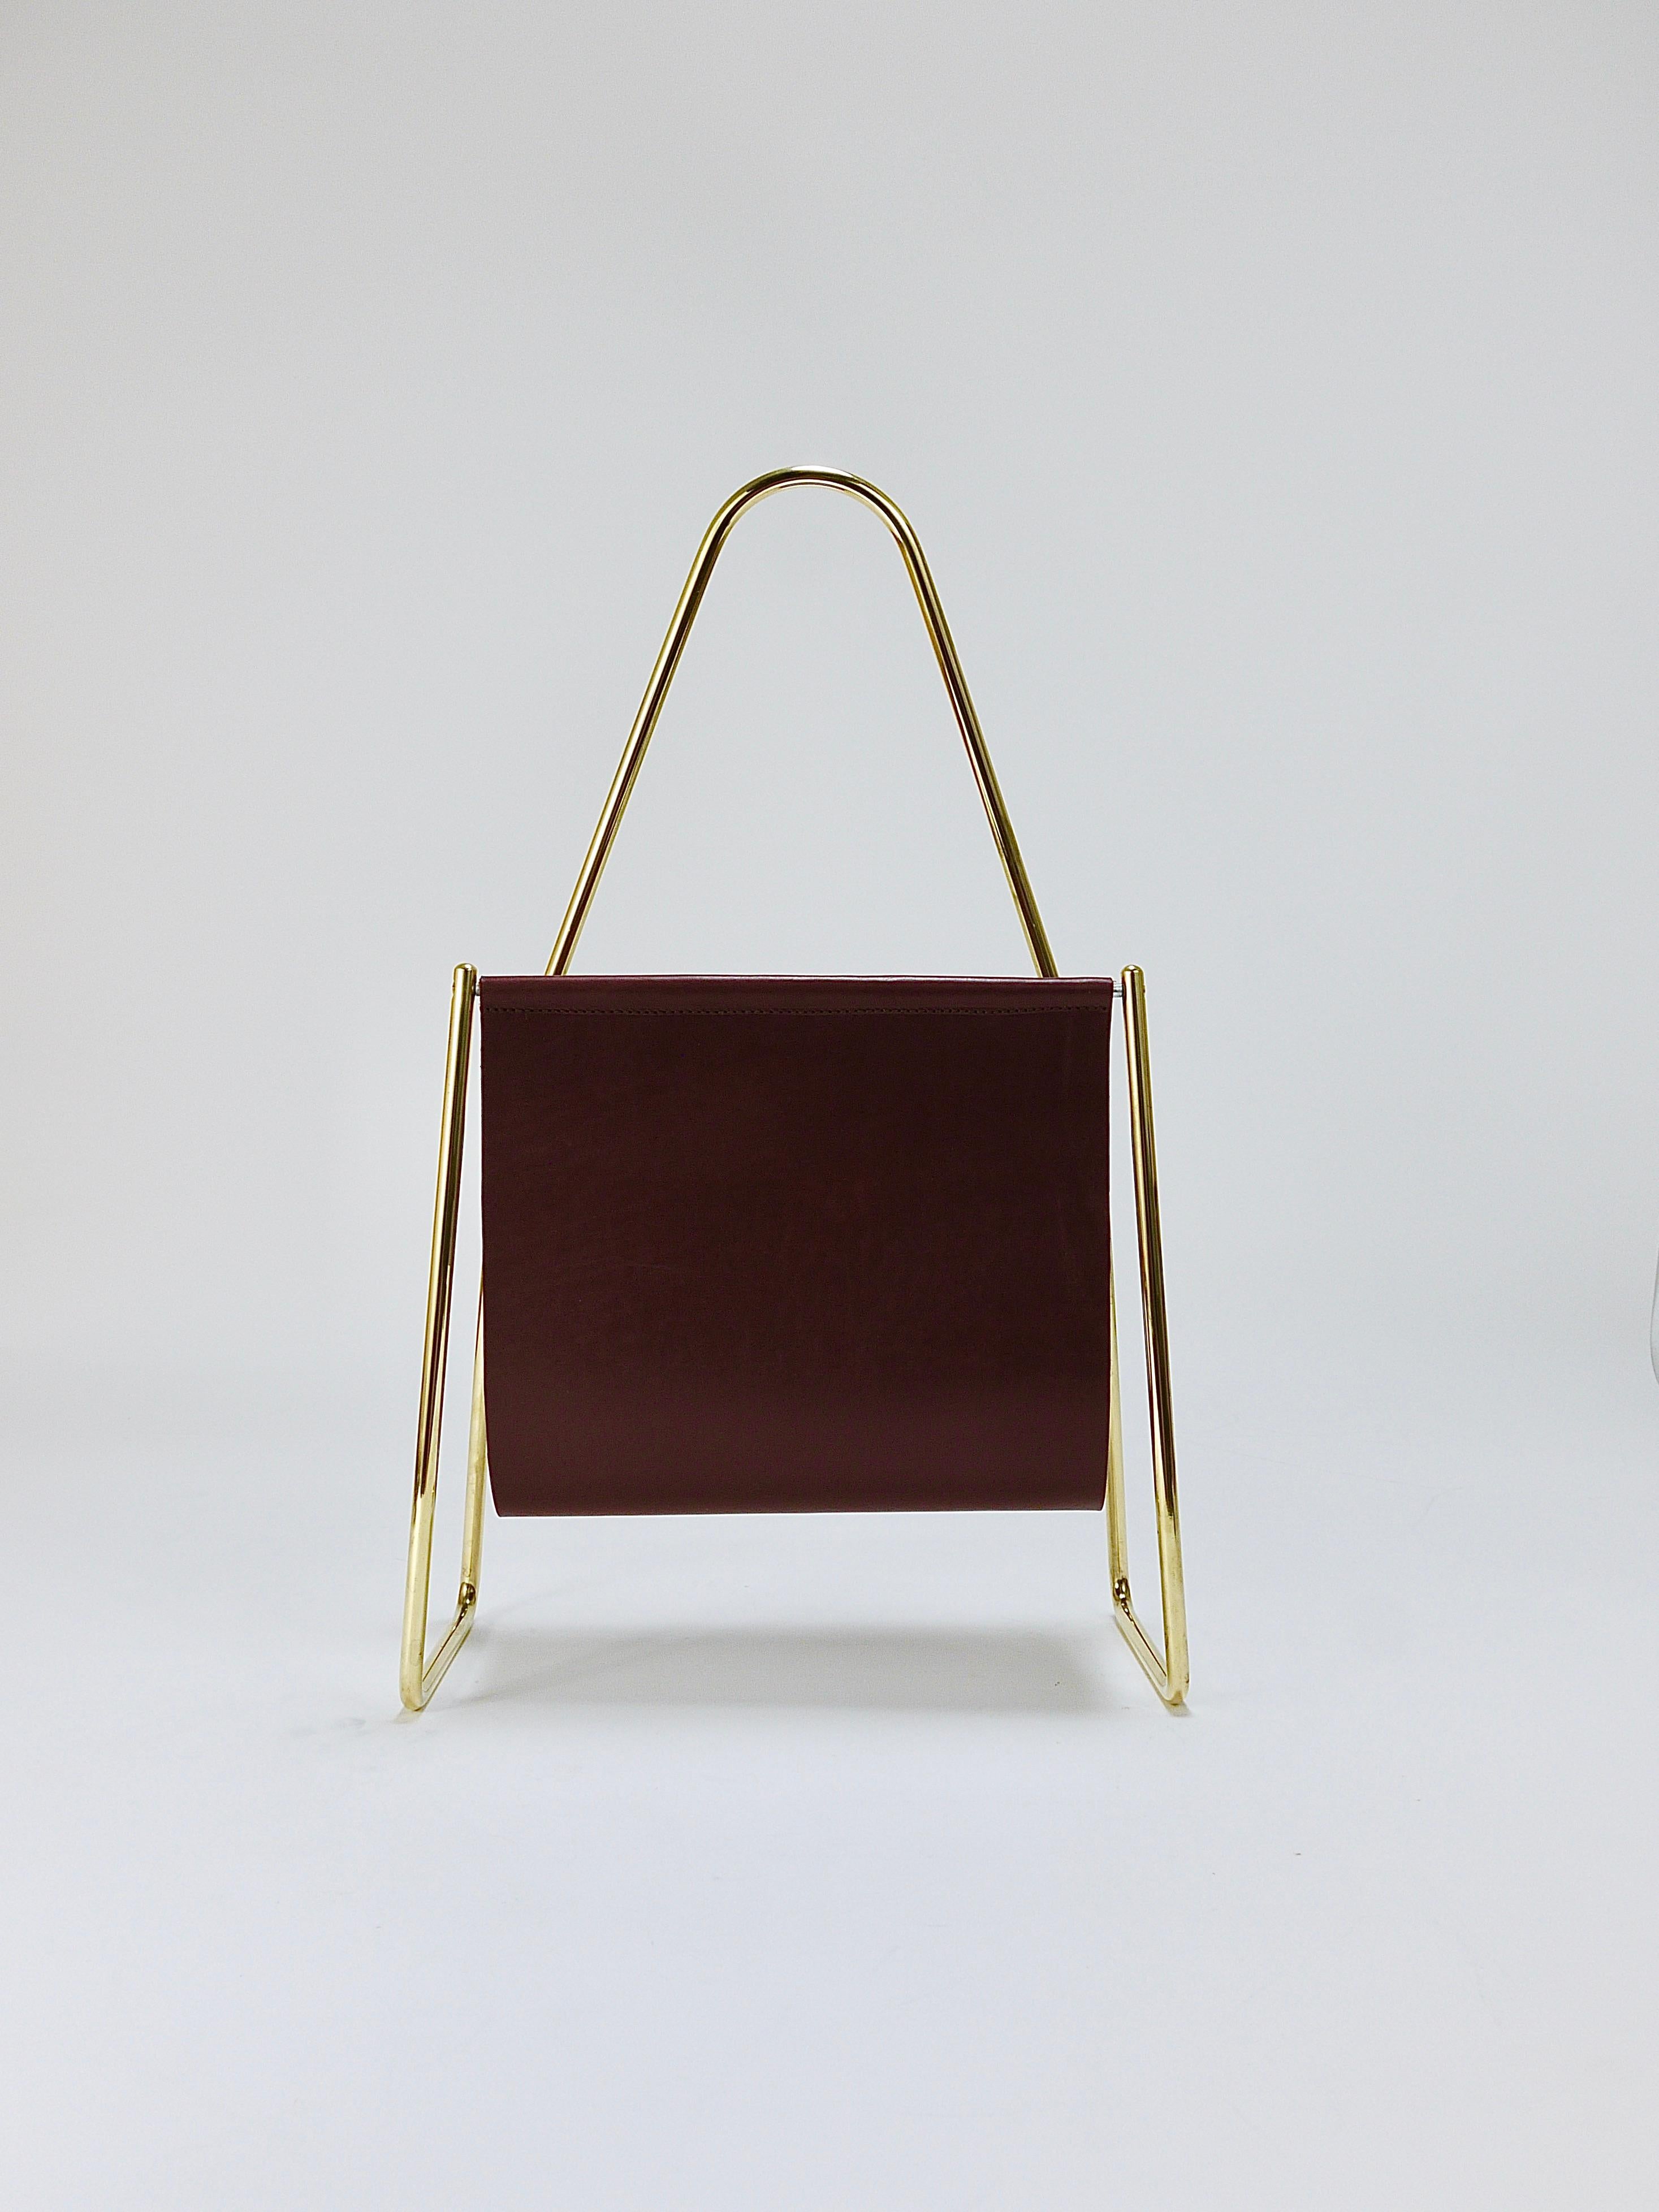 Carl Auböck II Midcentury Magazine Rack, Brass & Brown Leather, Vintage, Austria In Good Condition For Sale In Vienna, AT